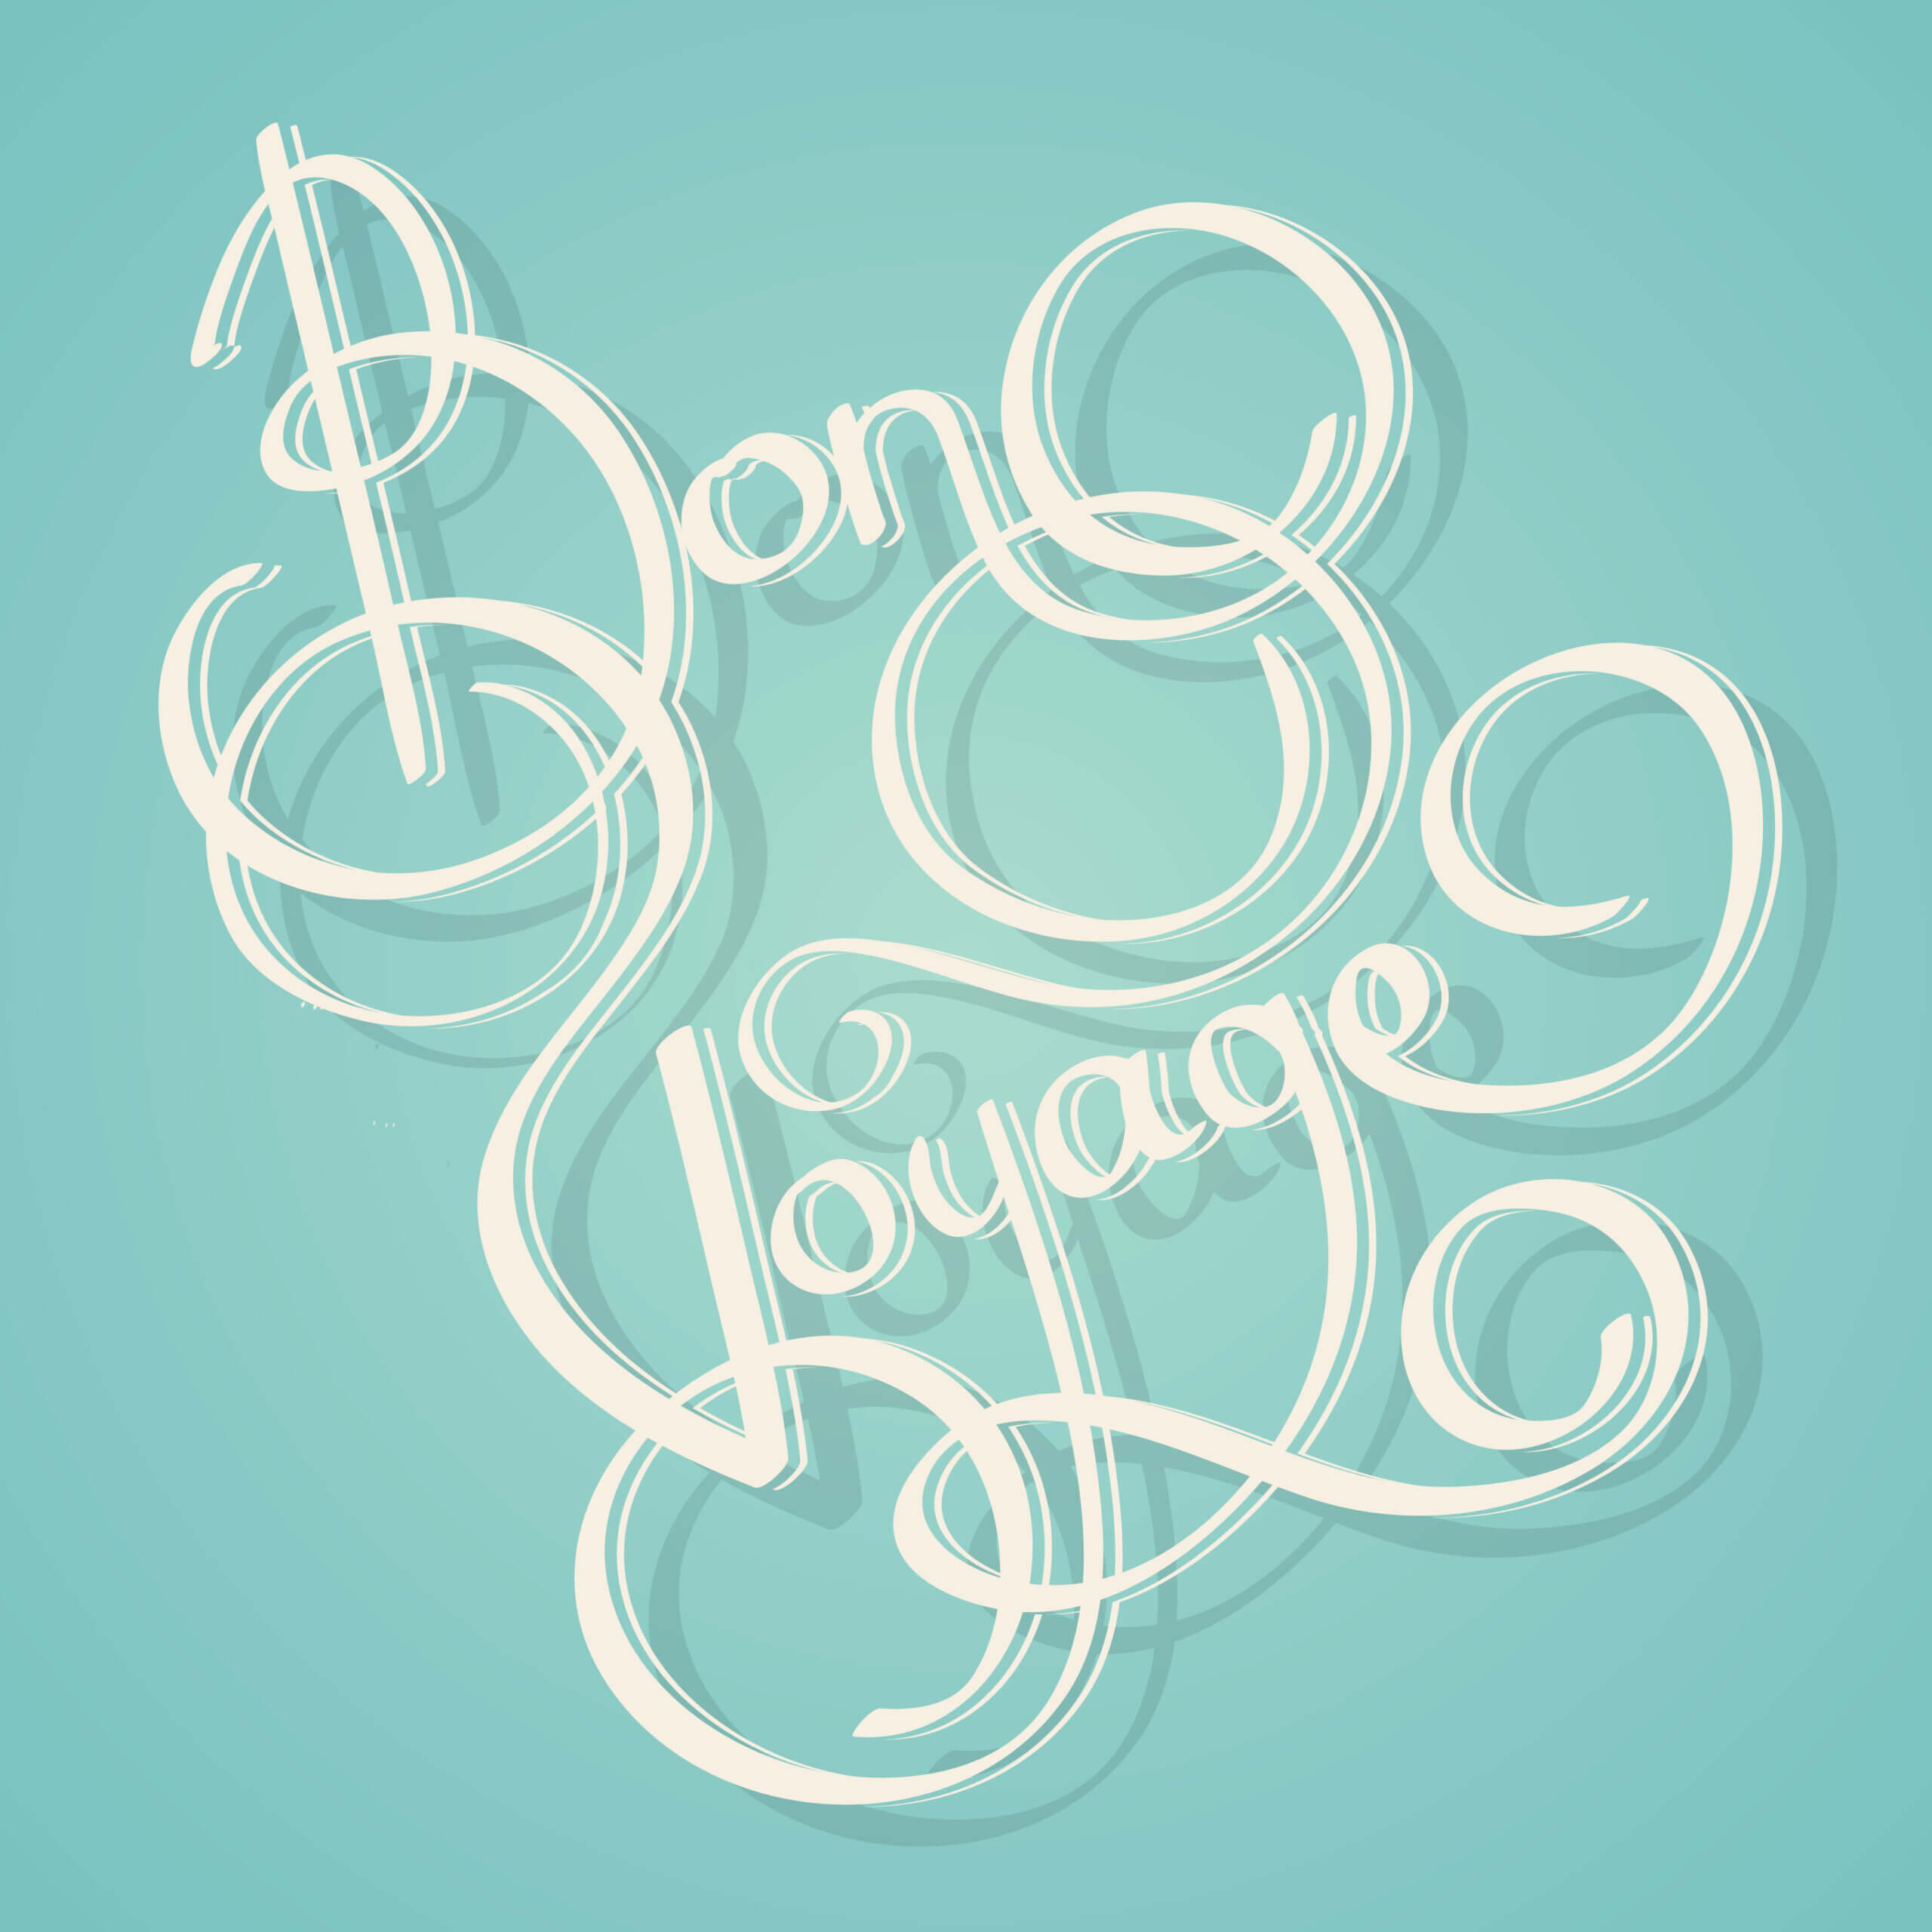 Calligraphy Bon Voyage Text – Download Free Vectors, Clipart Throughout Bon Voyage Card Template